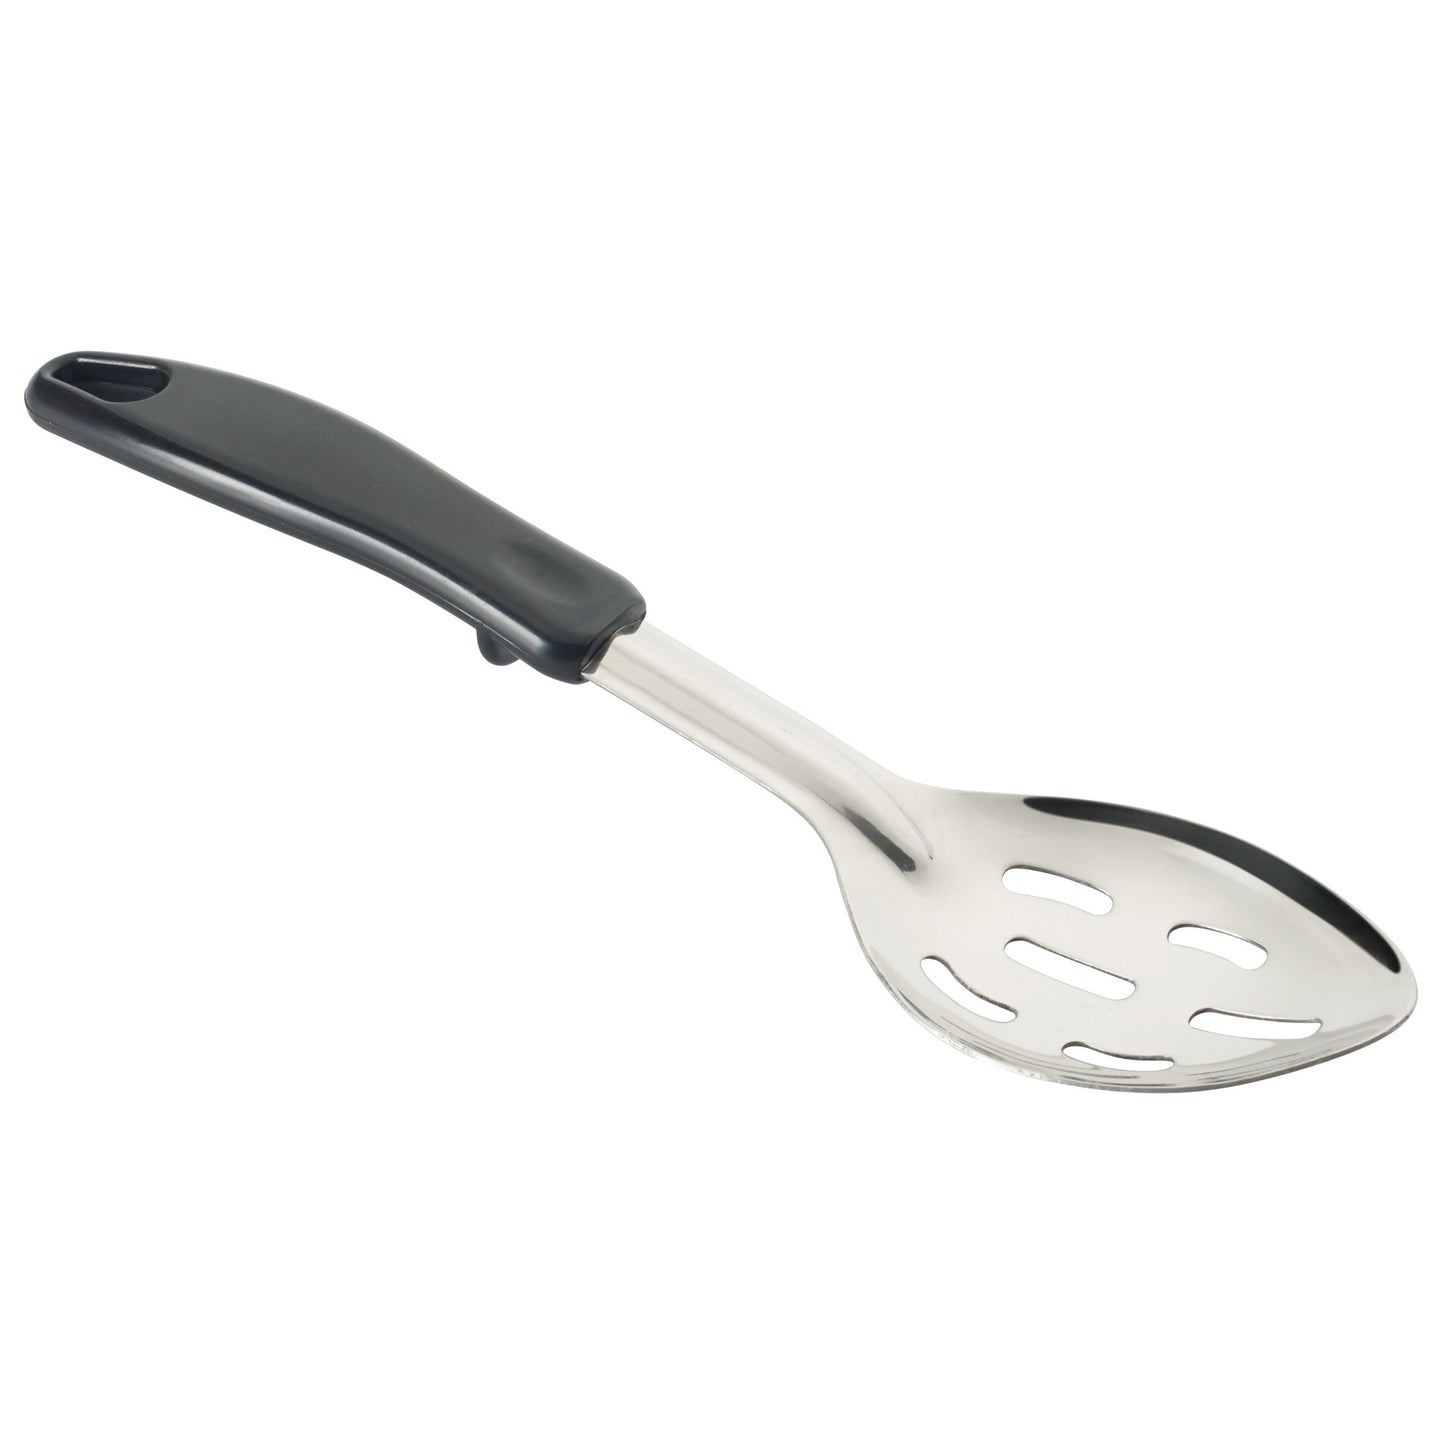 BHSP-11 - Basting Spoon with Stop-Hook Polypropylene Handle - Slotted, 11"